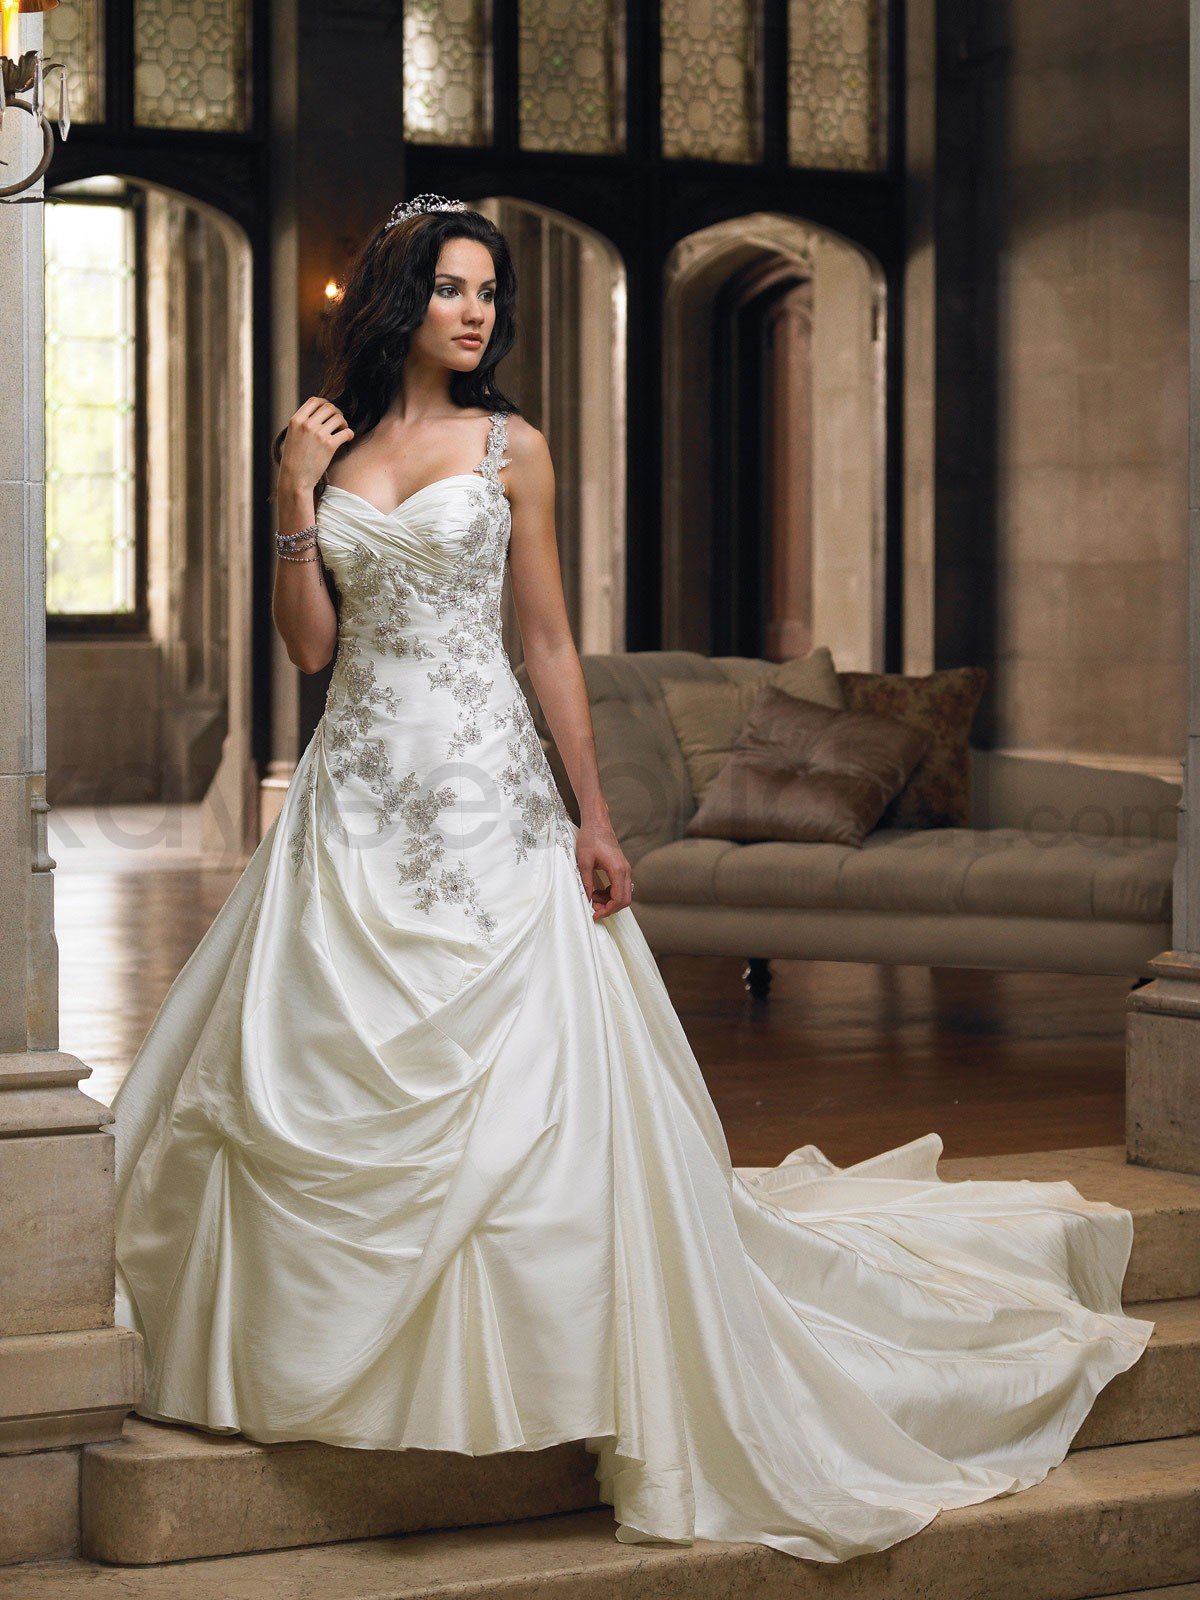 The Irresistible Attraction of Ball Gown Wedding Dresses – The WoW Style